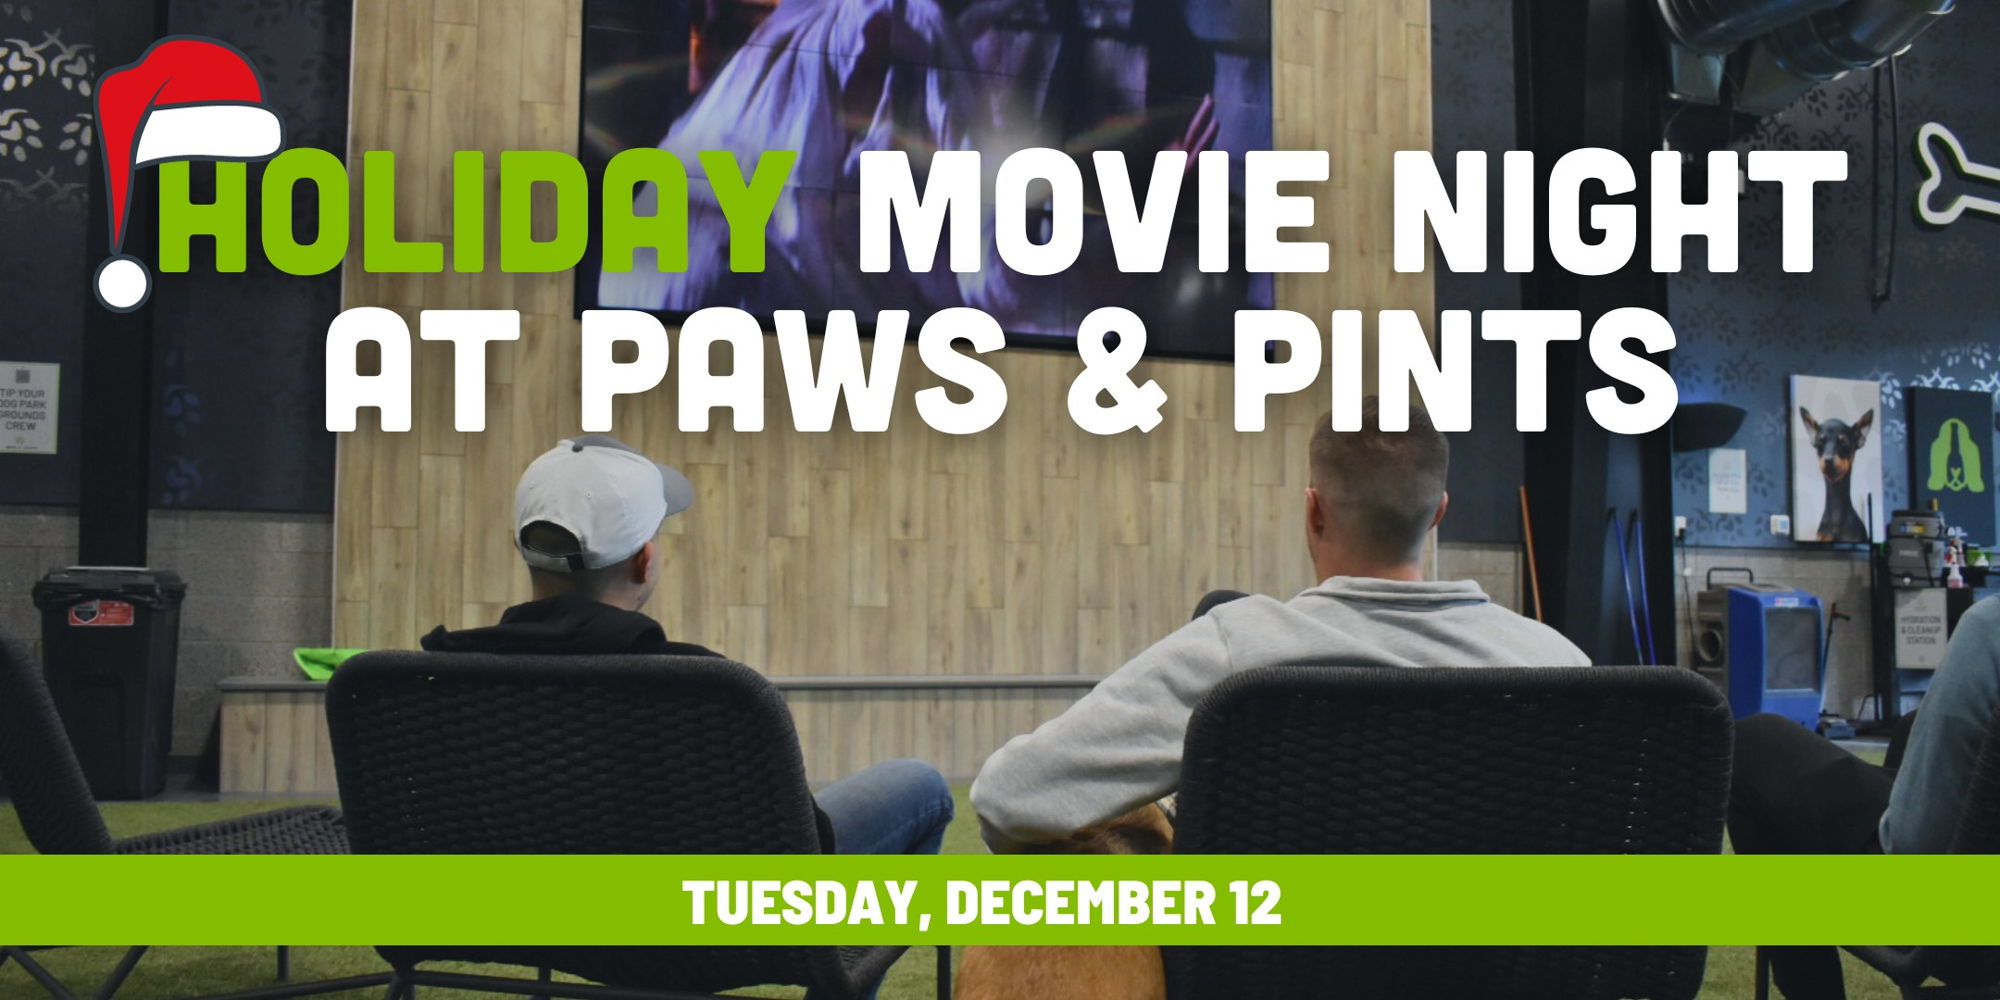 Holiday Movie Night at Paws and Pints promotional image